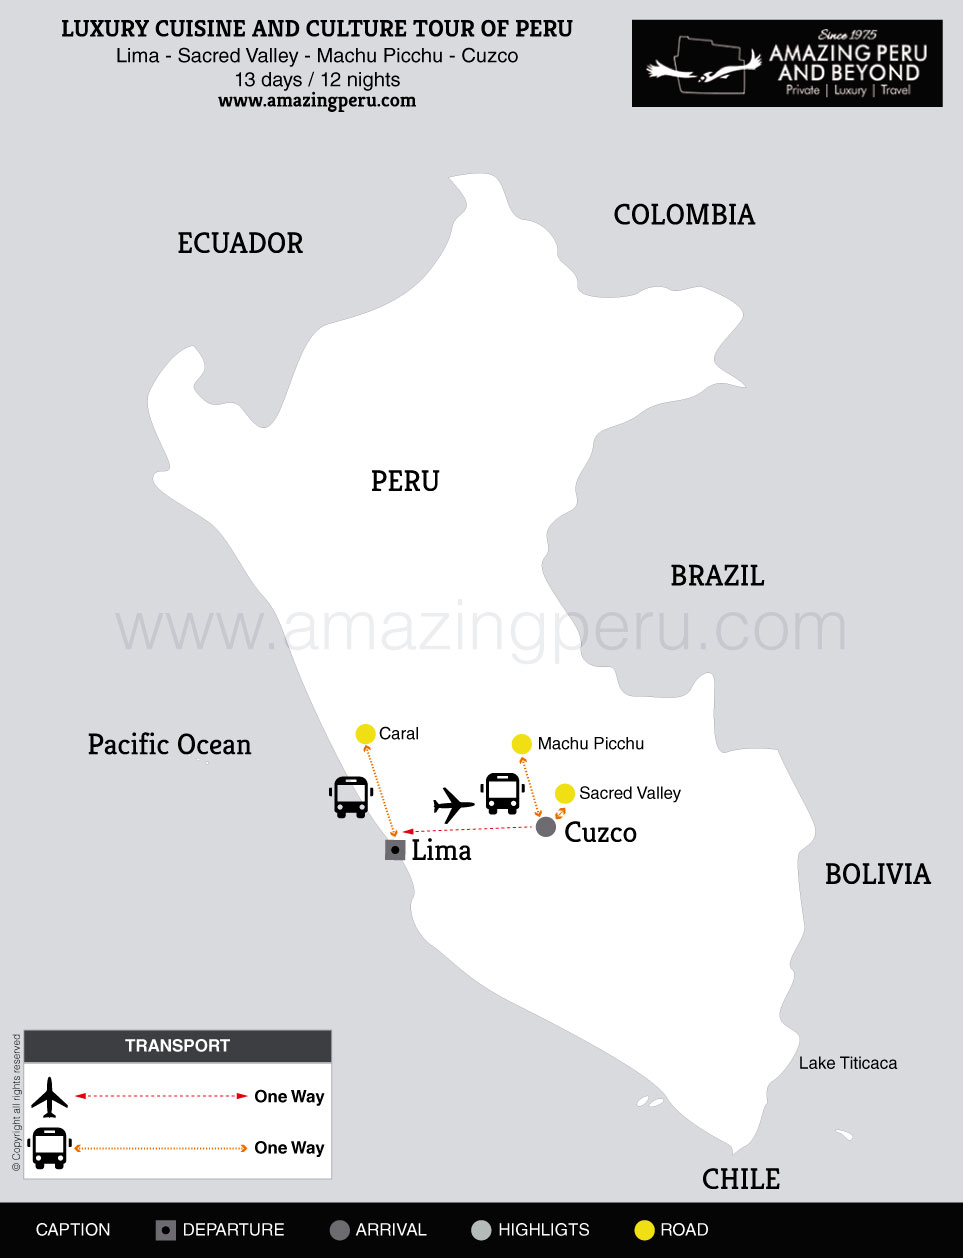 2023 Luxury Cuisine and Culture Tour of Peru - 13 days / 12 nights.